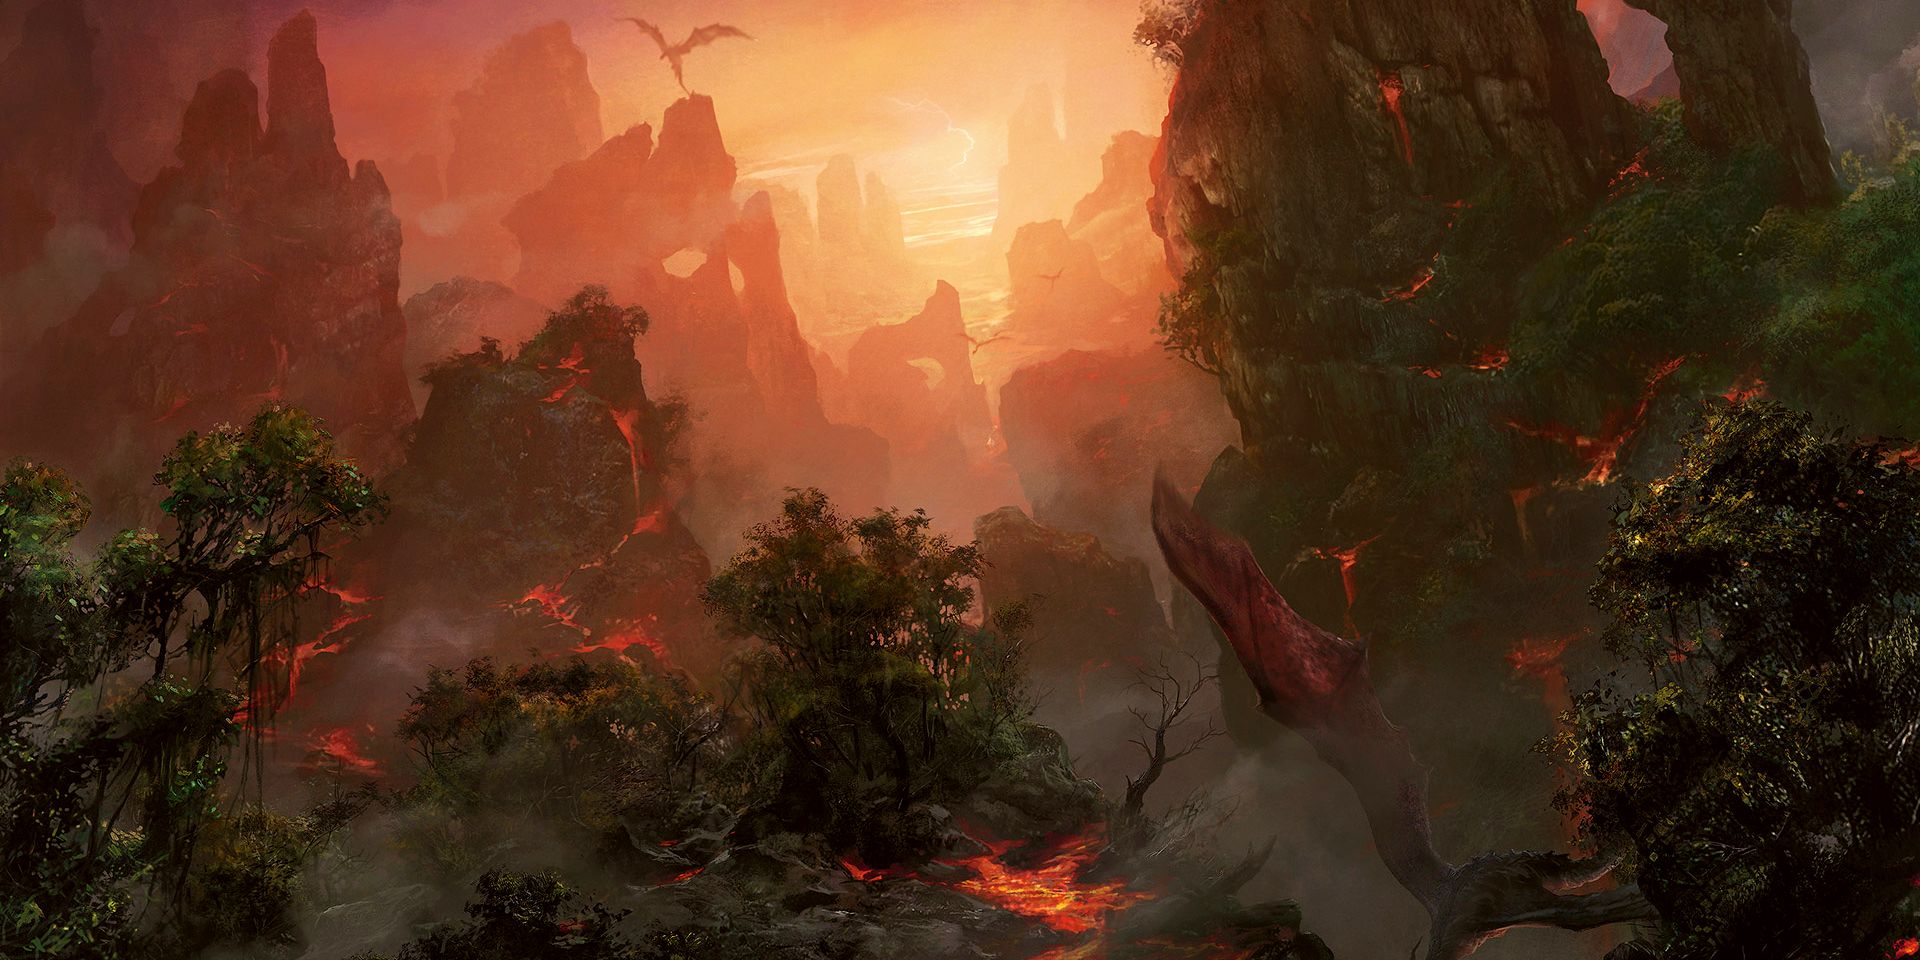 art depicting the forested Naya shard of the plane Alara from wizard of the coast's website